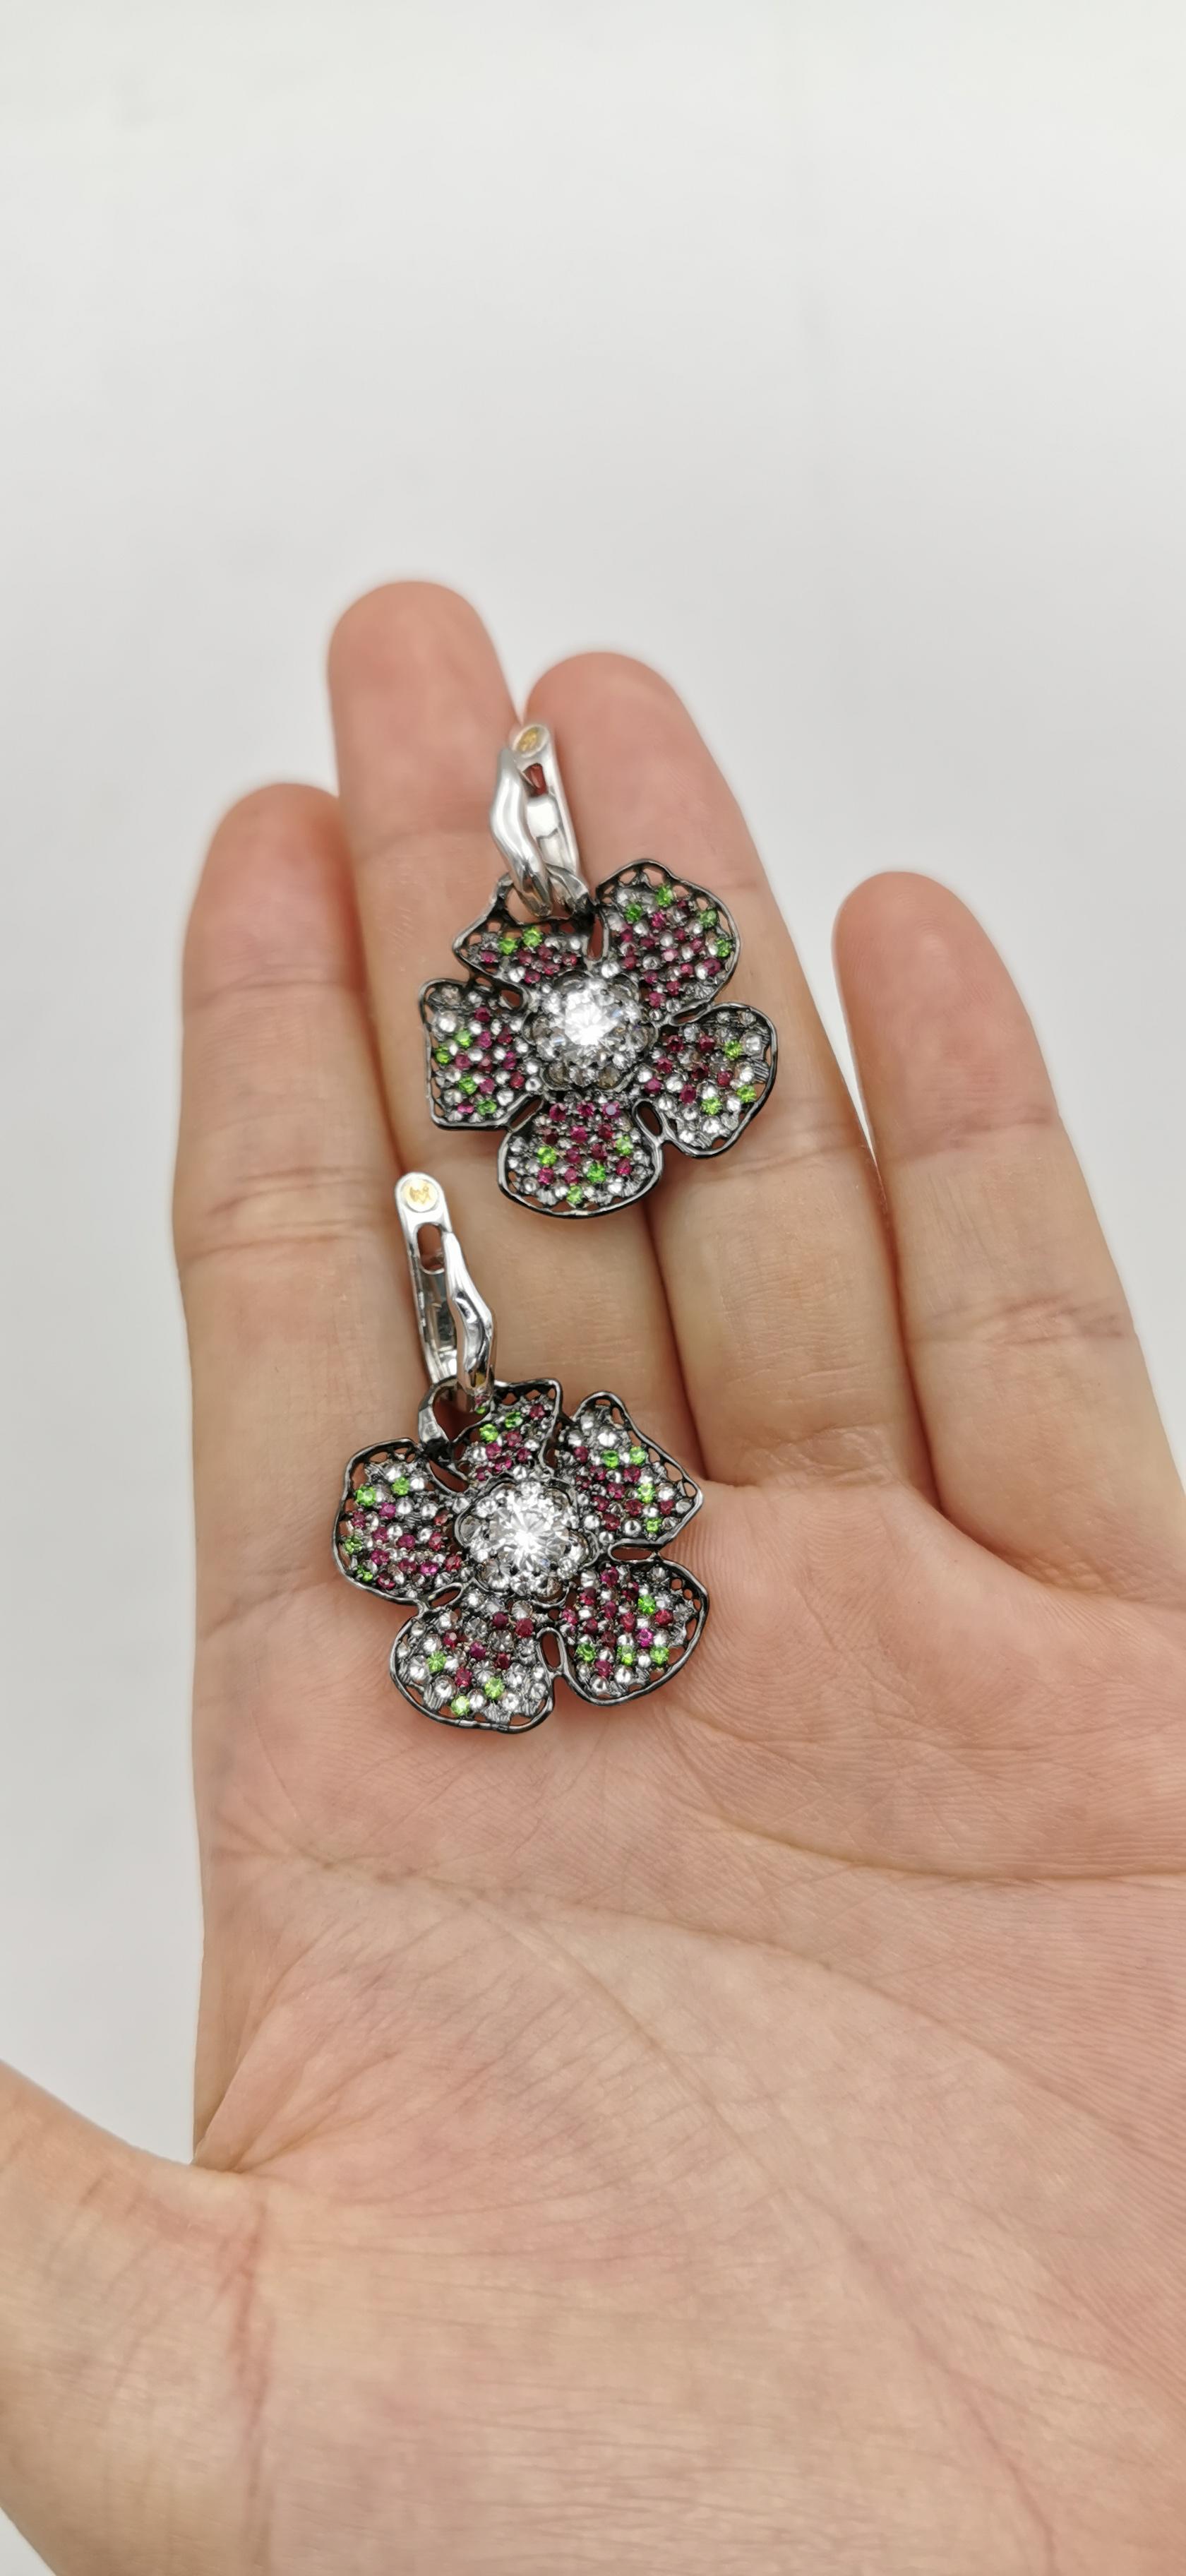 Over 3.5 ct diamonds, radiant demantoid garnet and  passionate rubies  make a great harmony on a  poppy flower design cocktail earrings.  

Stones mounted upside down , the flower petals gives unusual luminescence.  
Rubies shining on the blackened